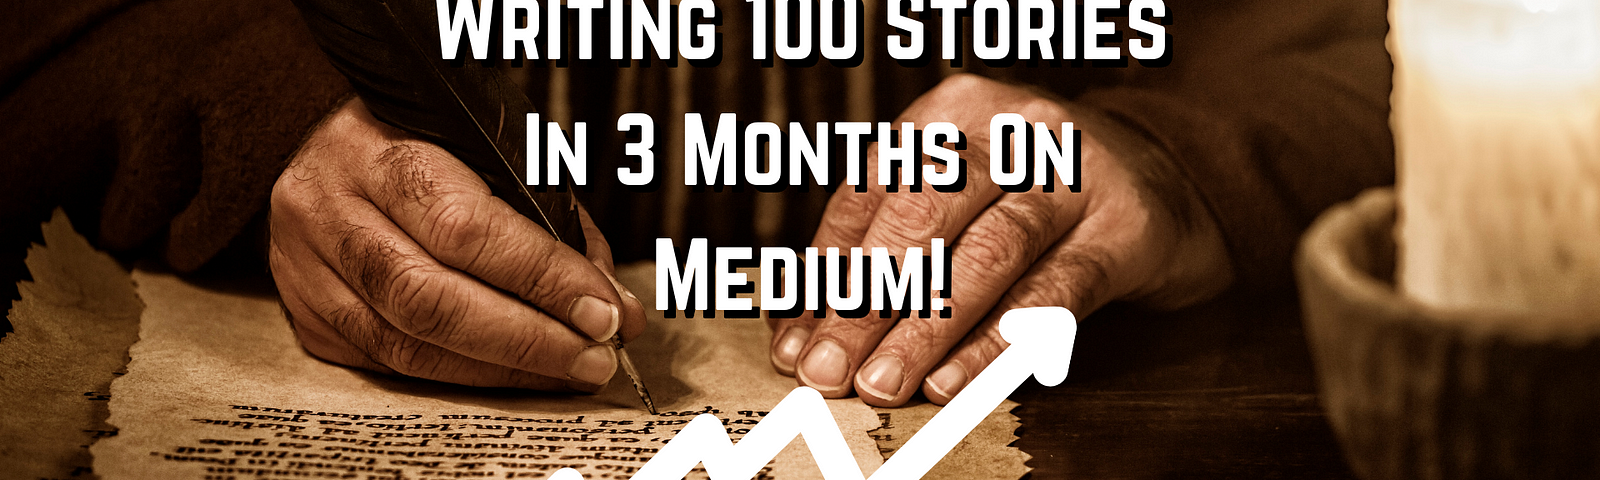 writing 100 stories on medium in 3 months